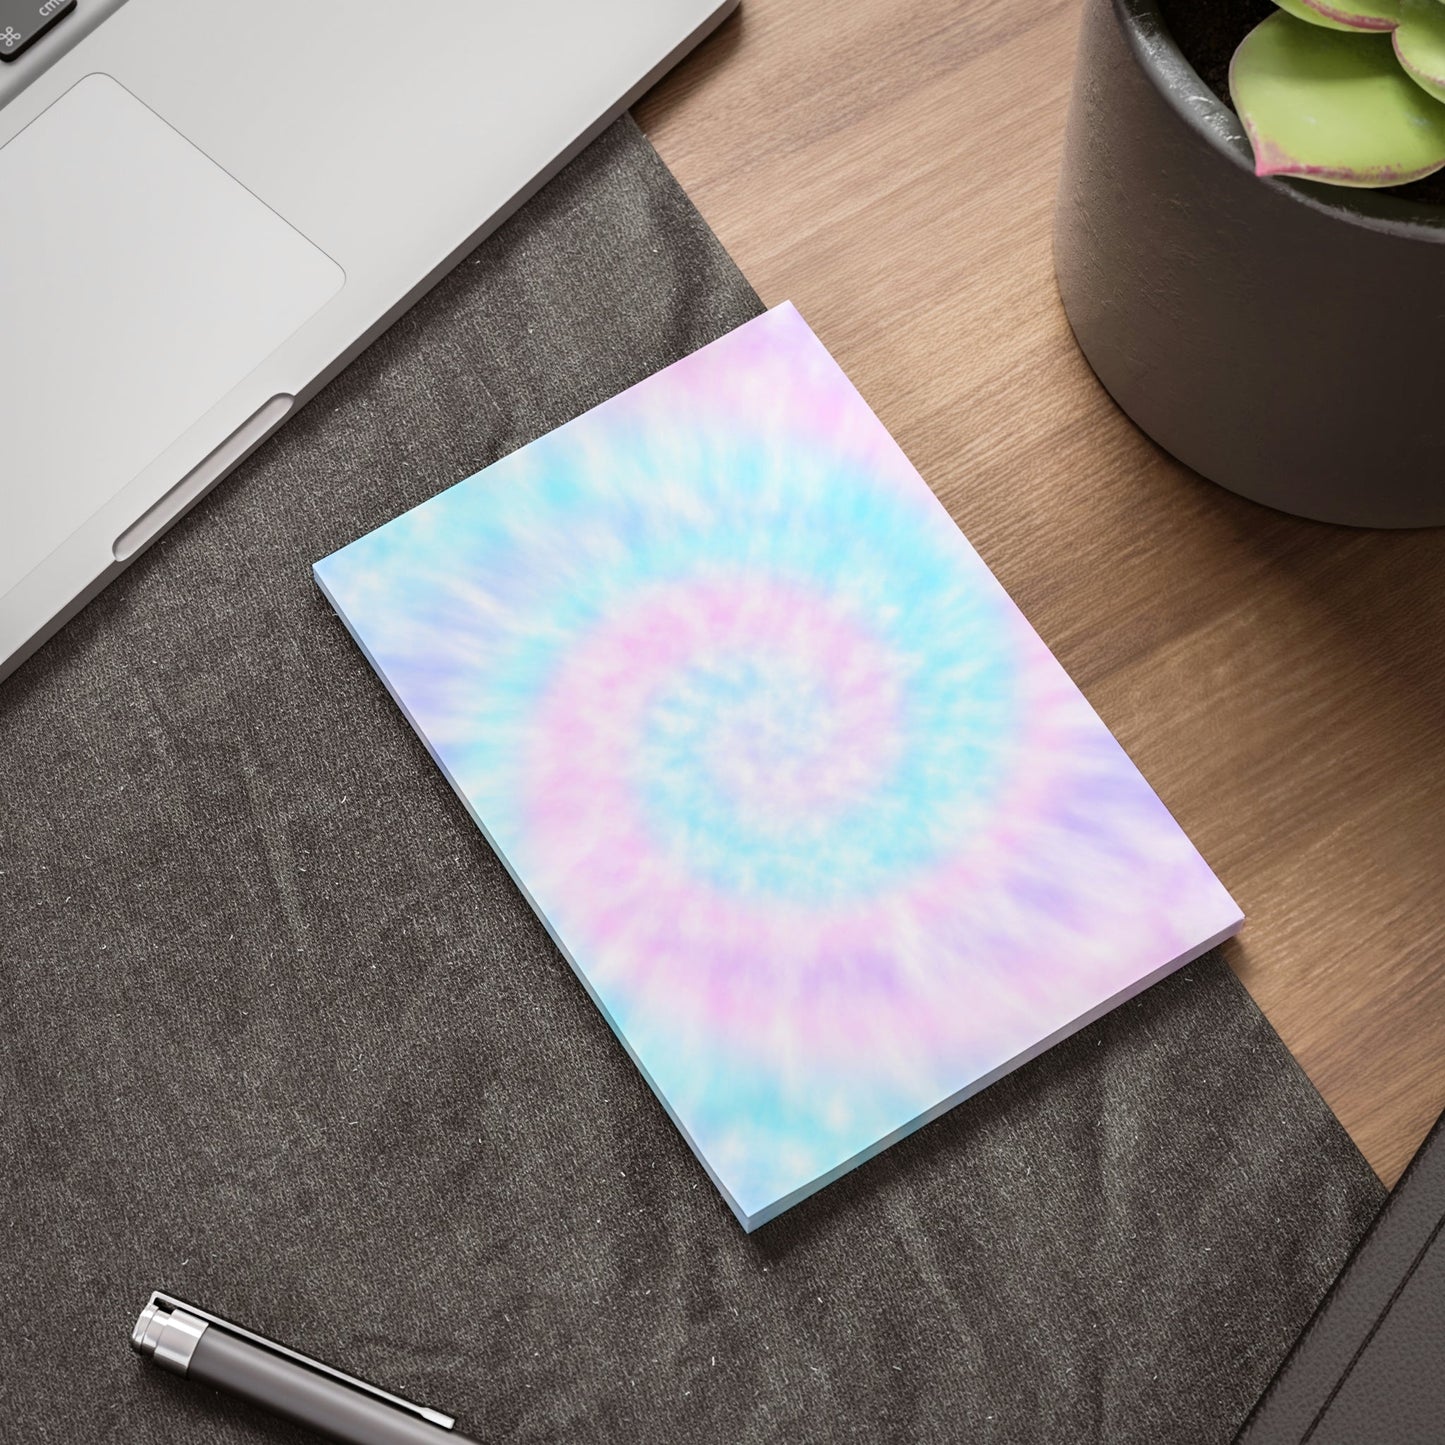 Tie Dye Spiral Post-it® Note Pad Paper products Pink Sweetheart